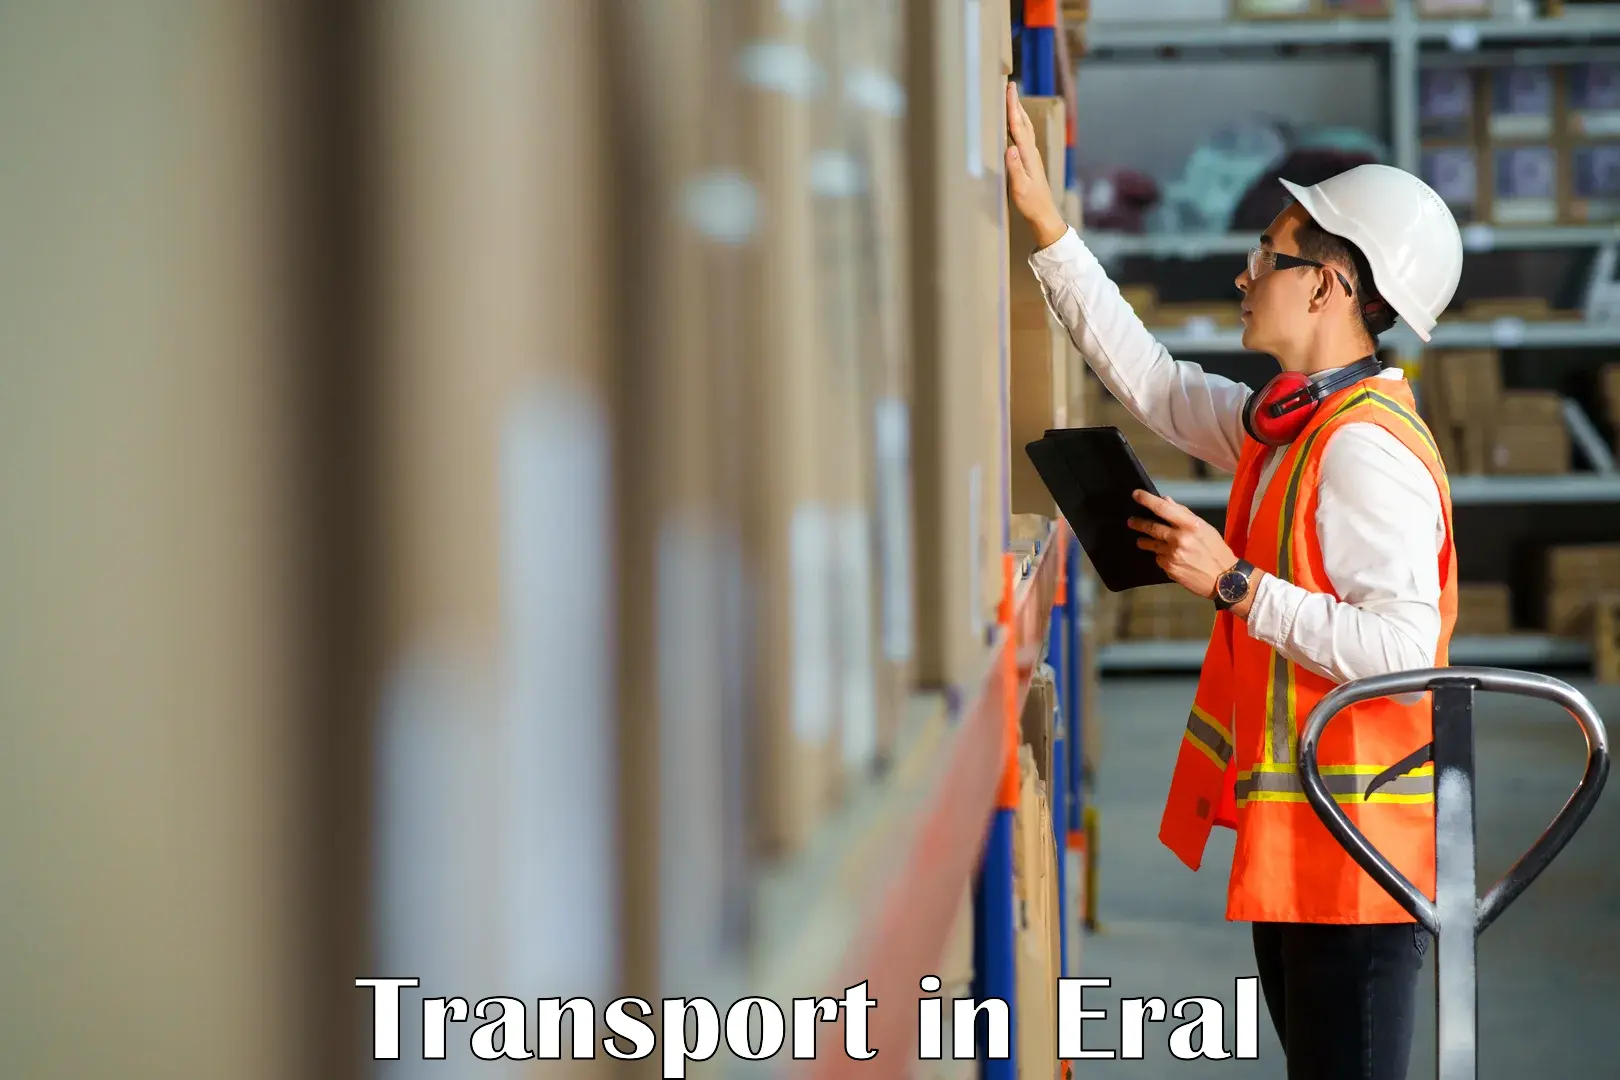 Goods transport services in Eral